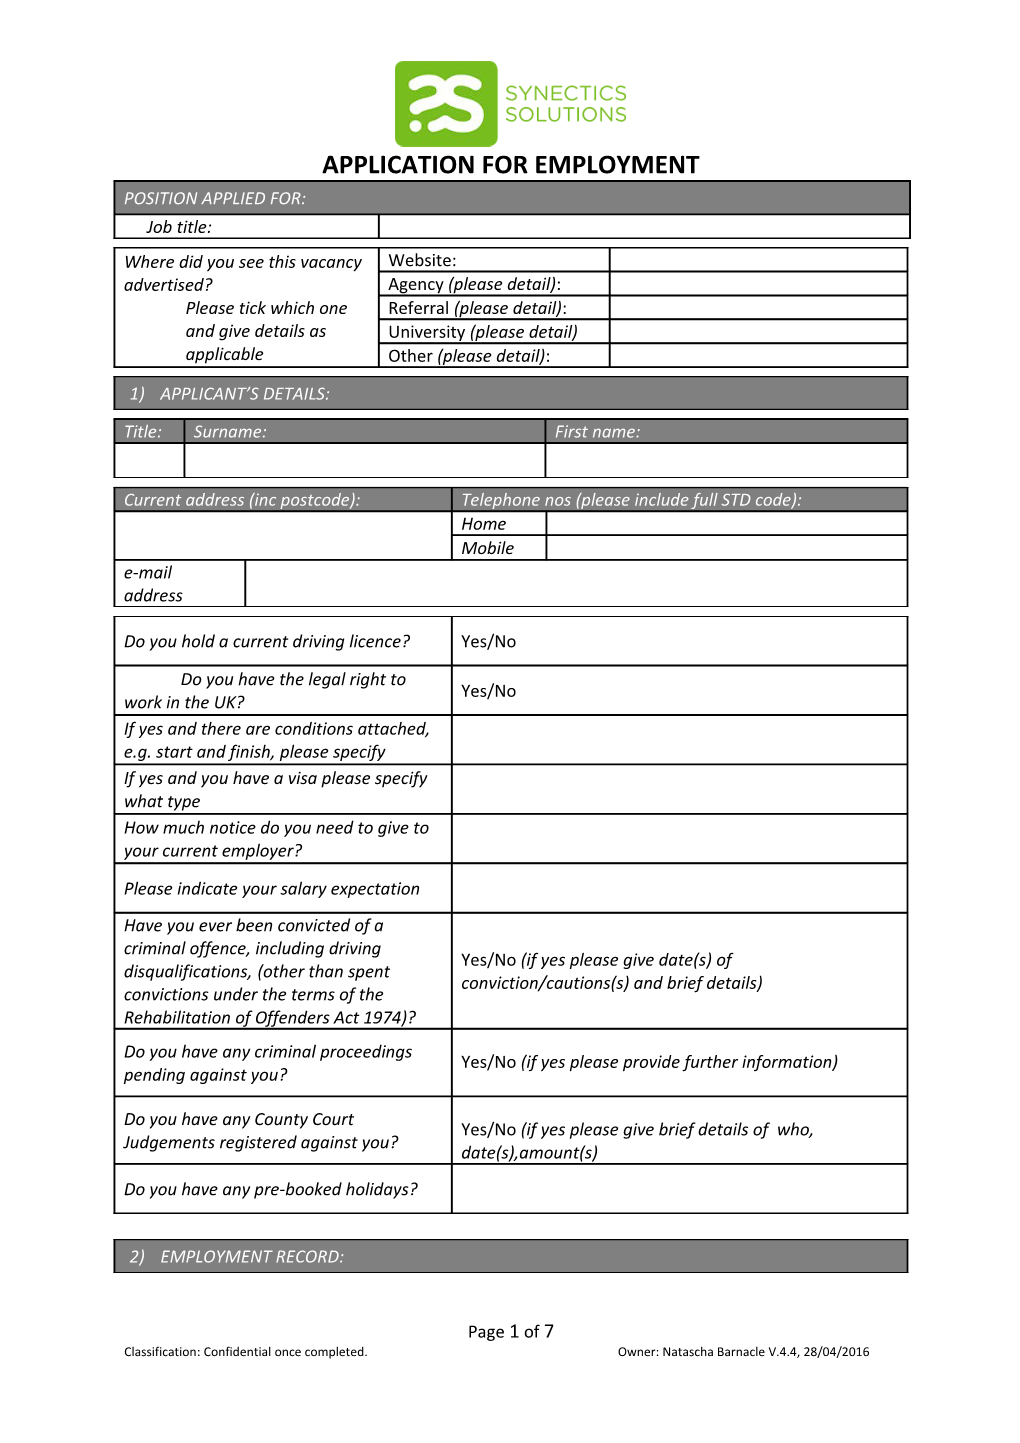 Application for Employment s100